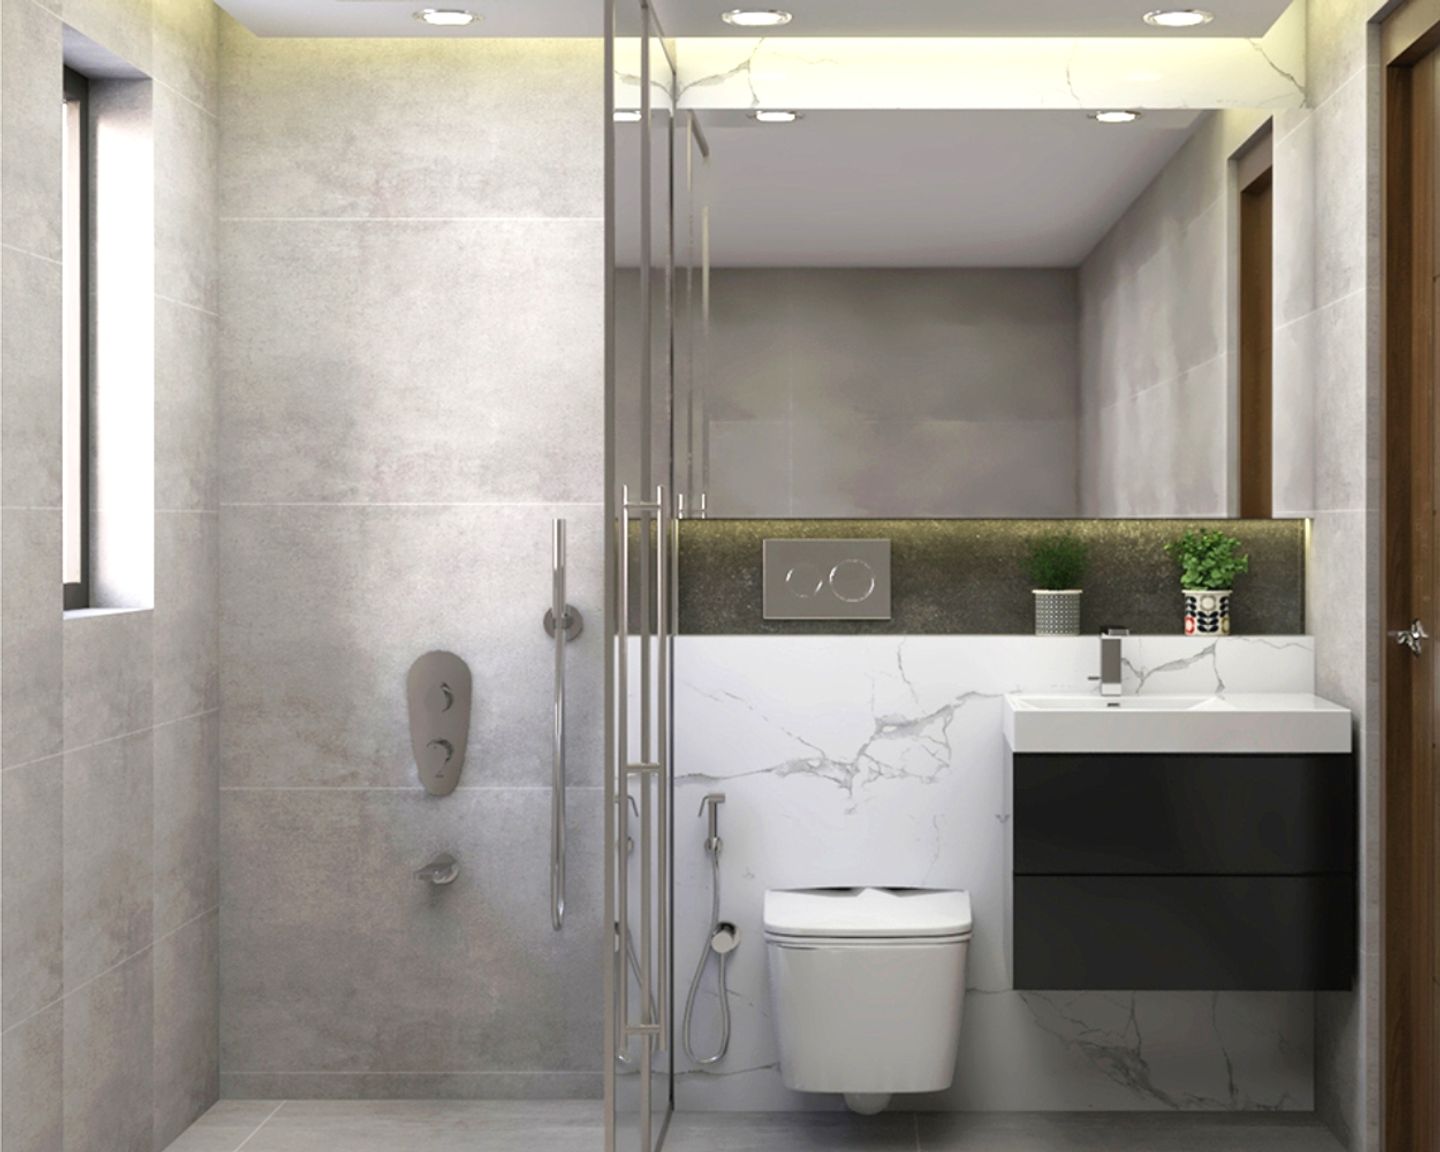 7X5 Ft Grey And White Bathroom Design With False Ceiling - Livspace